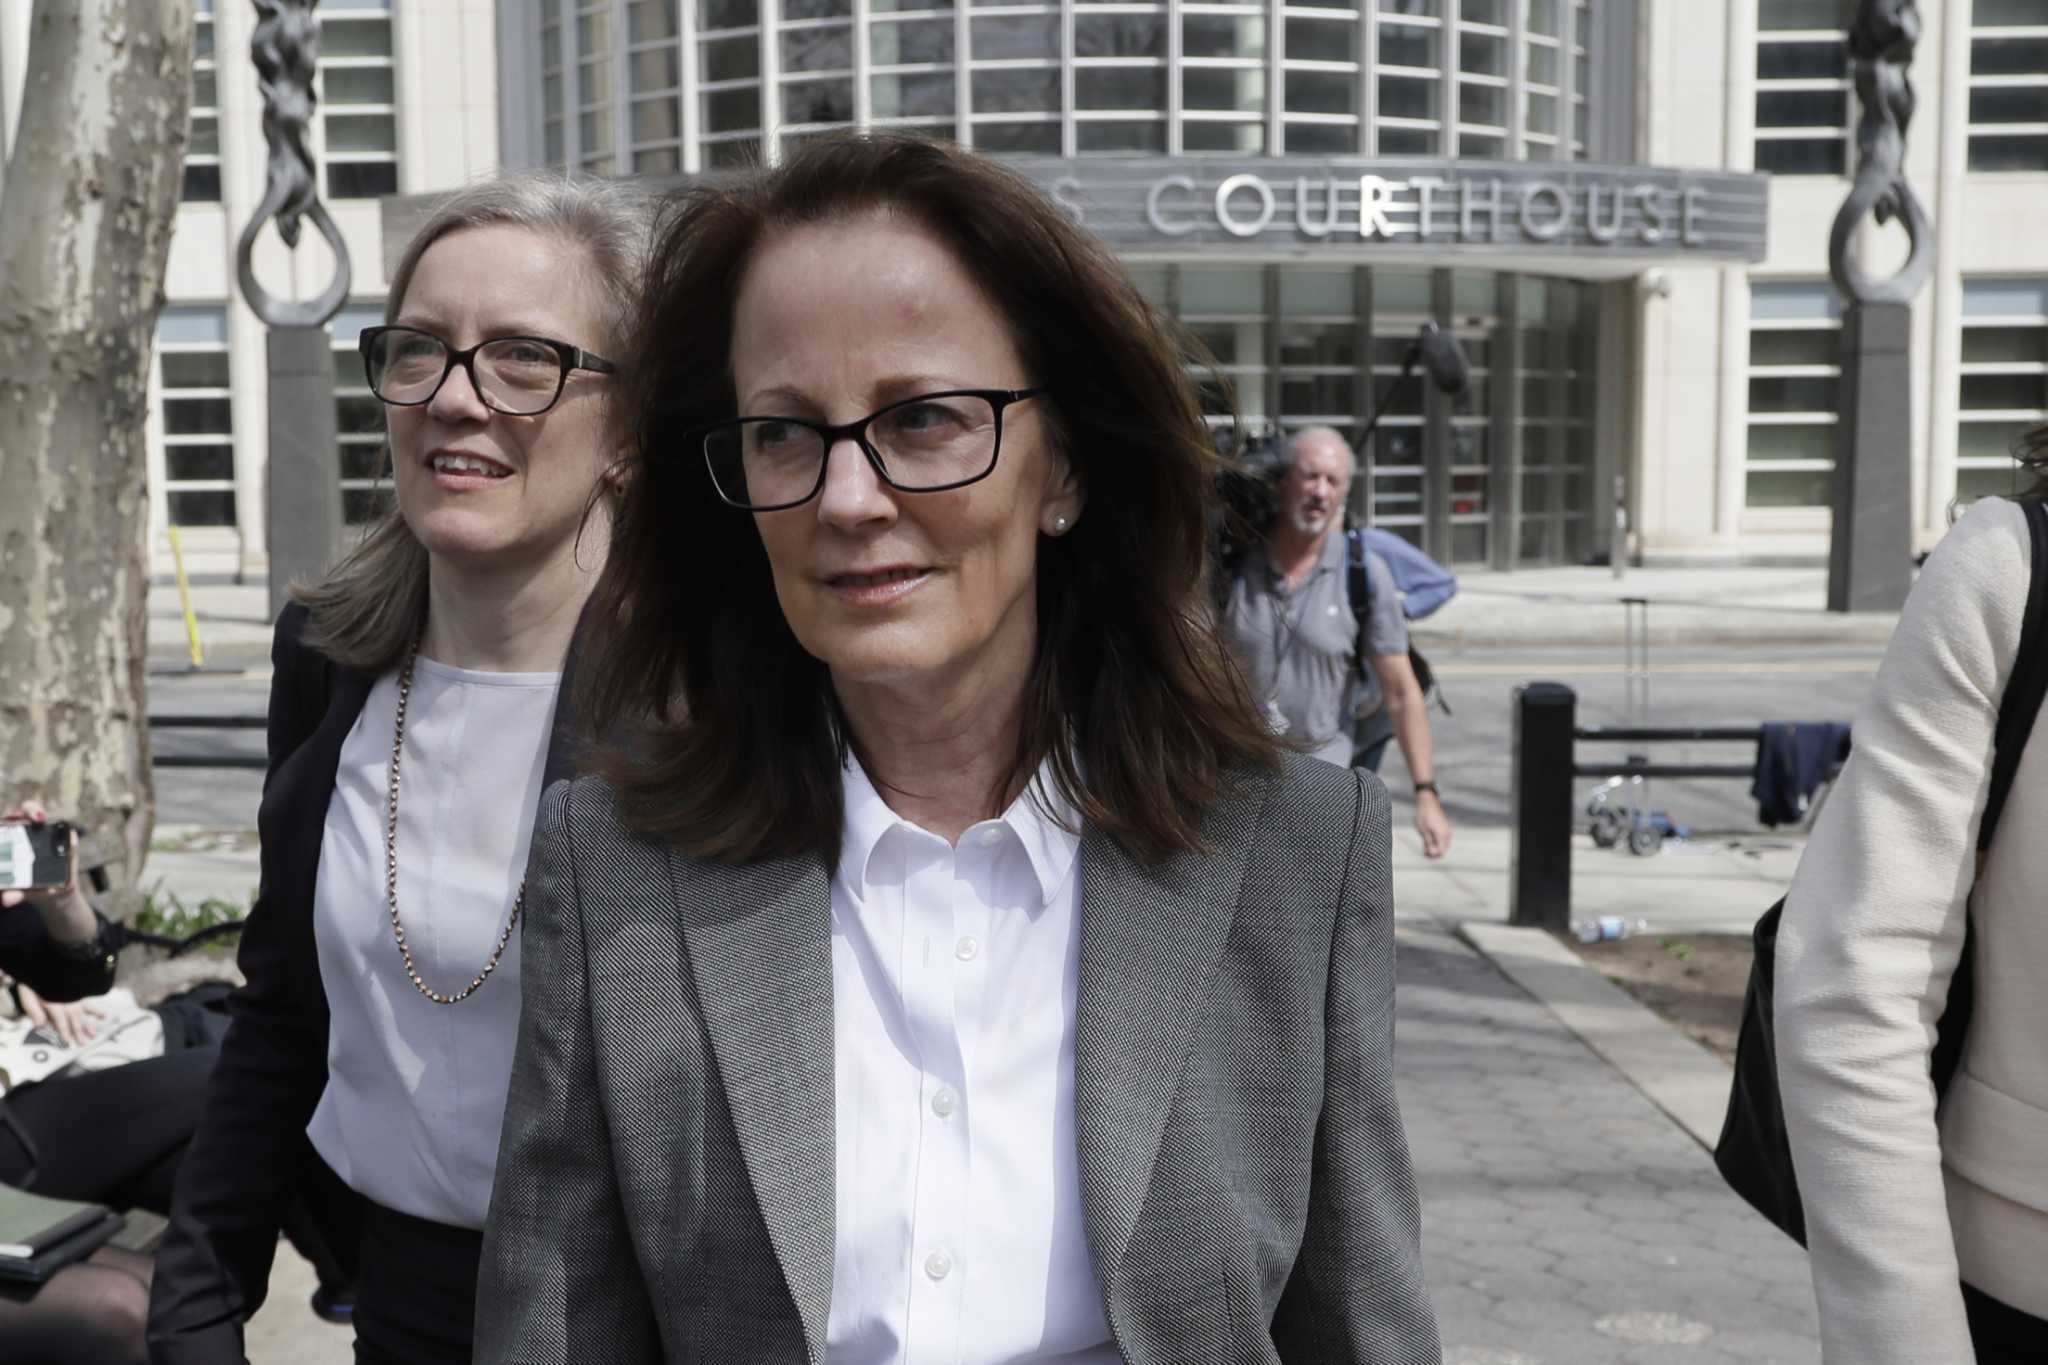 Little-known bookkeeper Kathy Russell will be final defendant sentenced in NXIVM case pic picture